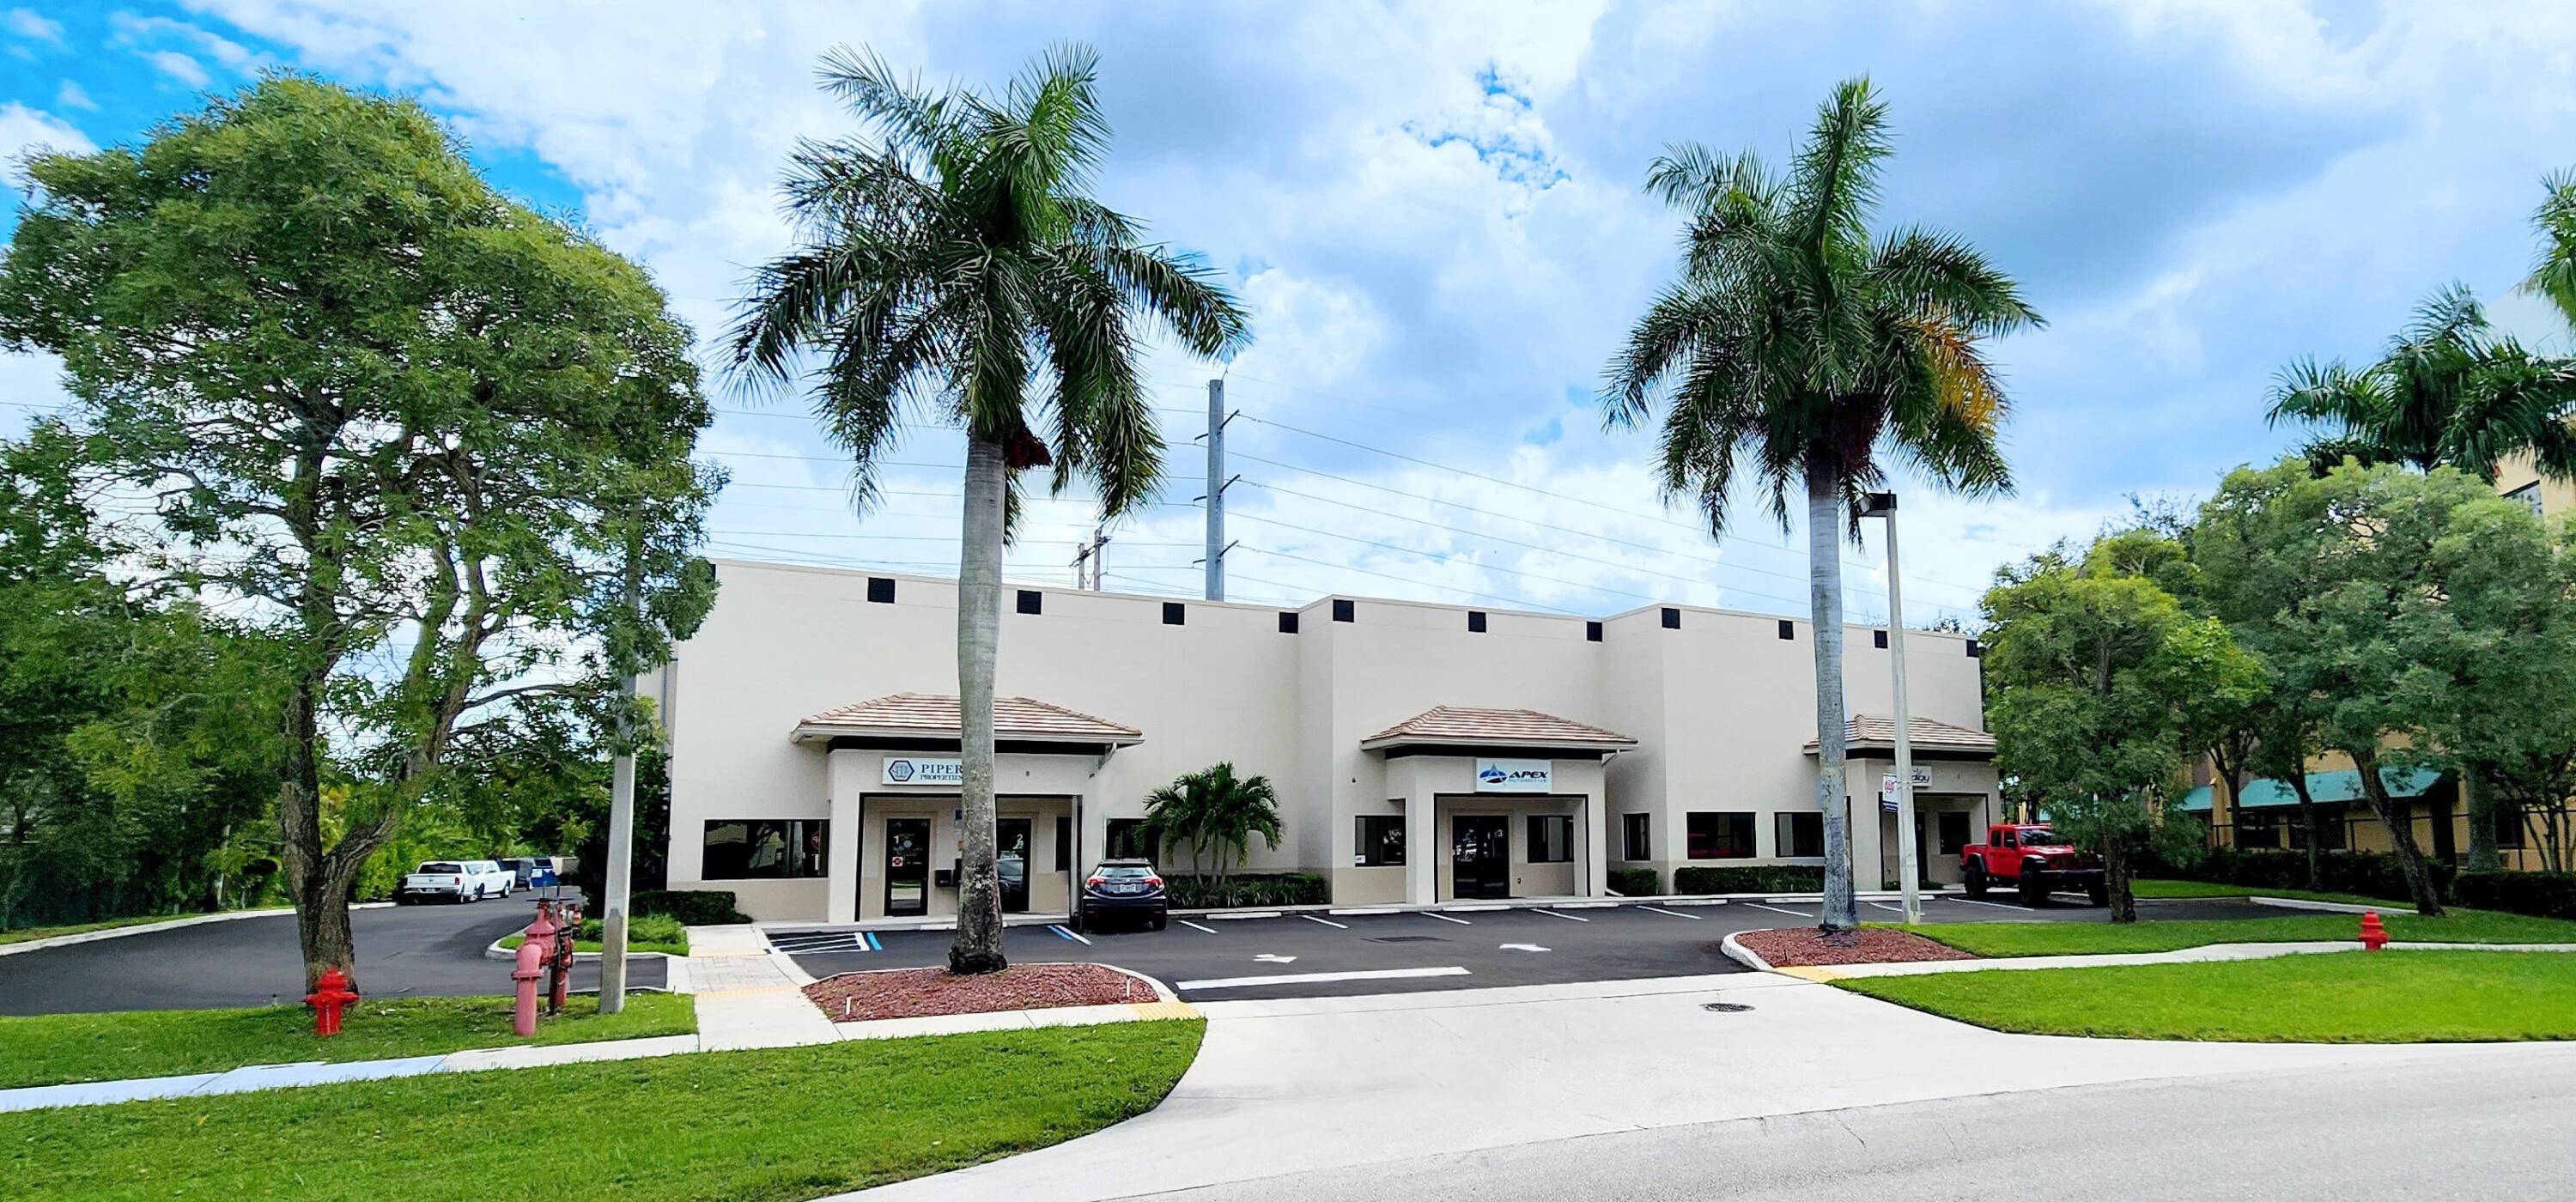 Prime Flex Space Investment Property for Sale Exceptional investment opportunity in the heart of Wellington, FL !